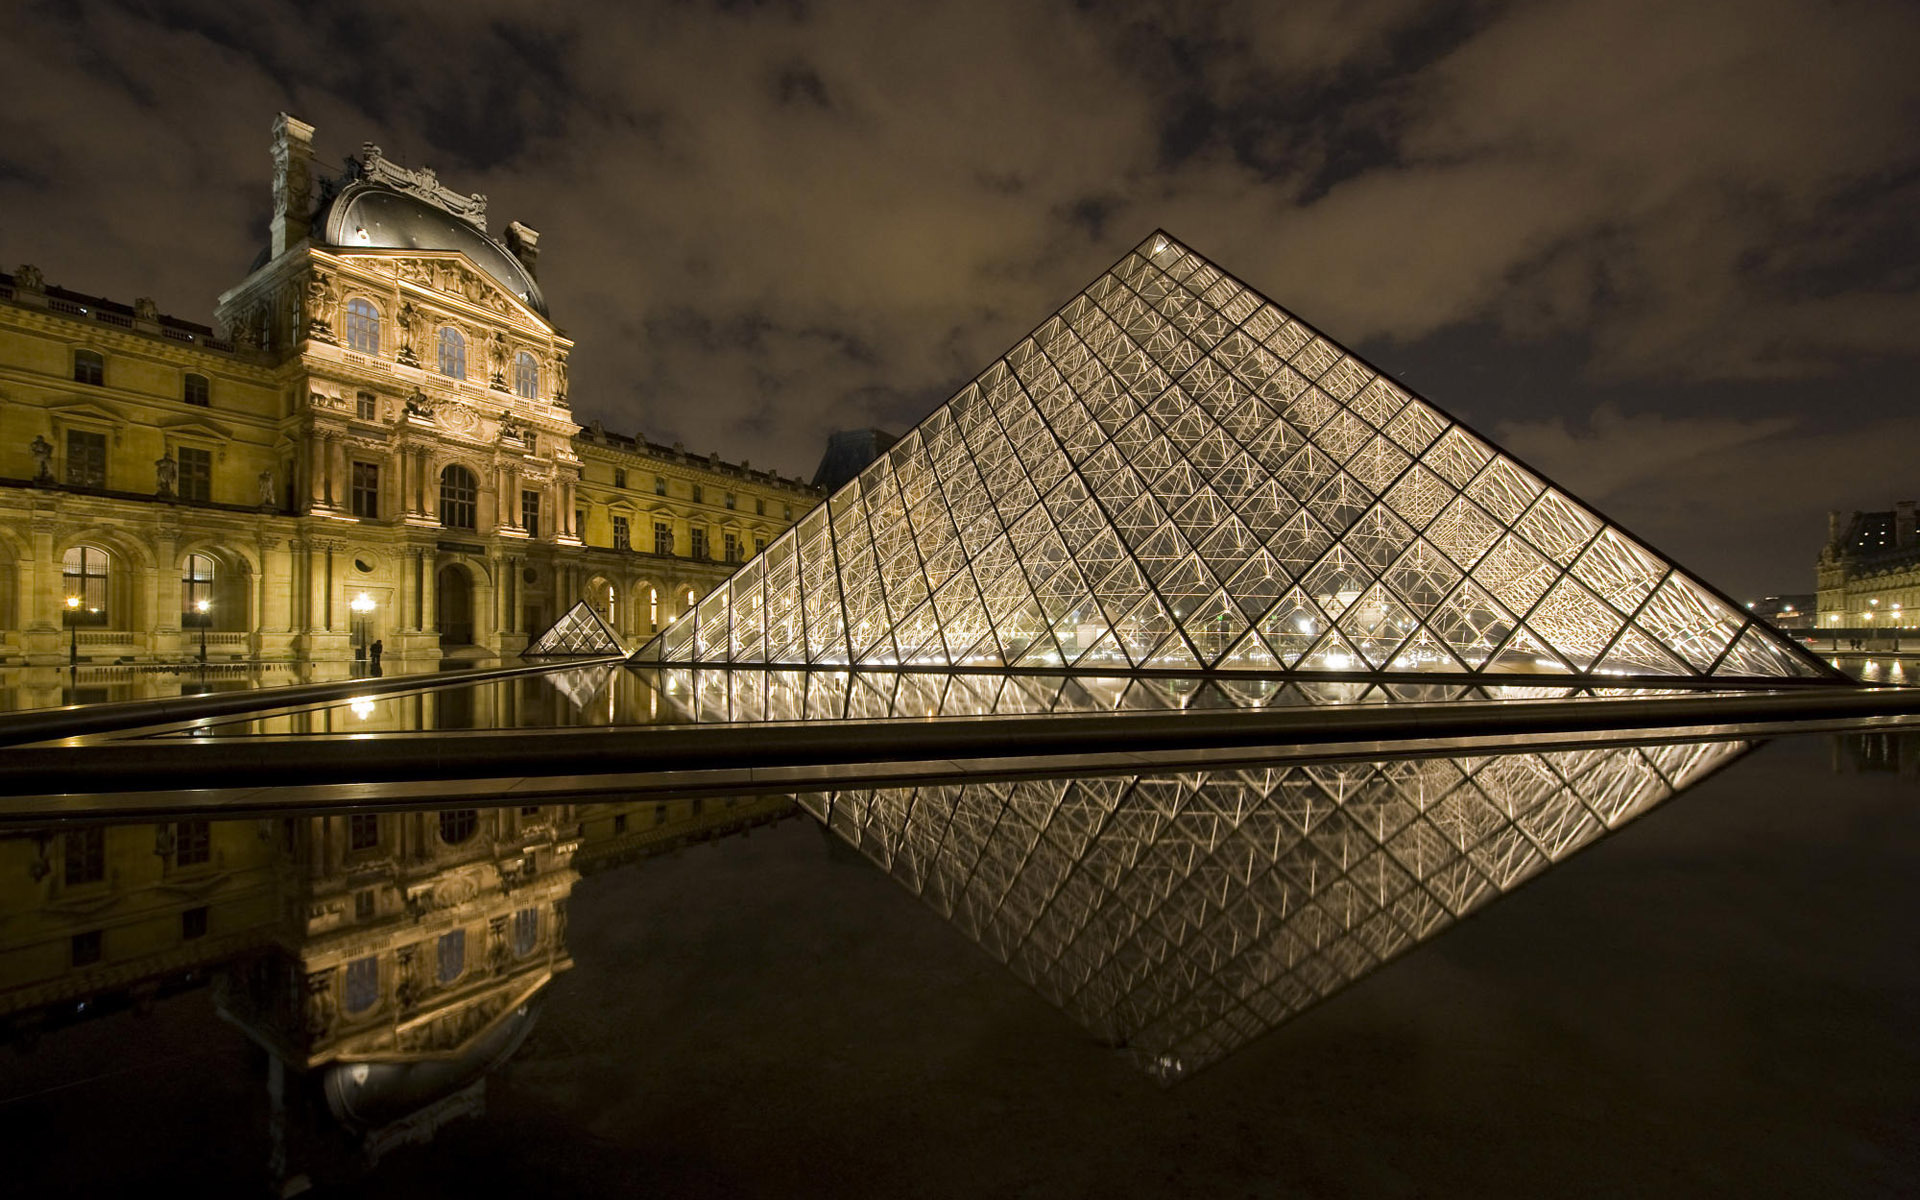 Man Made The Louvre HD Wallpaper | Background Image